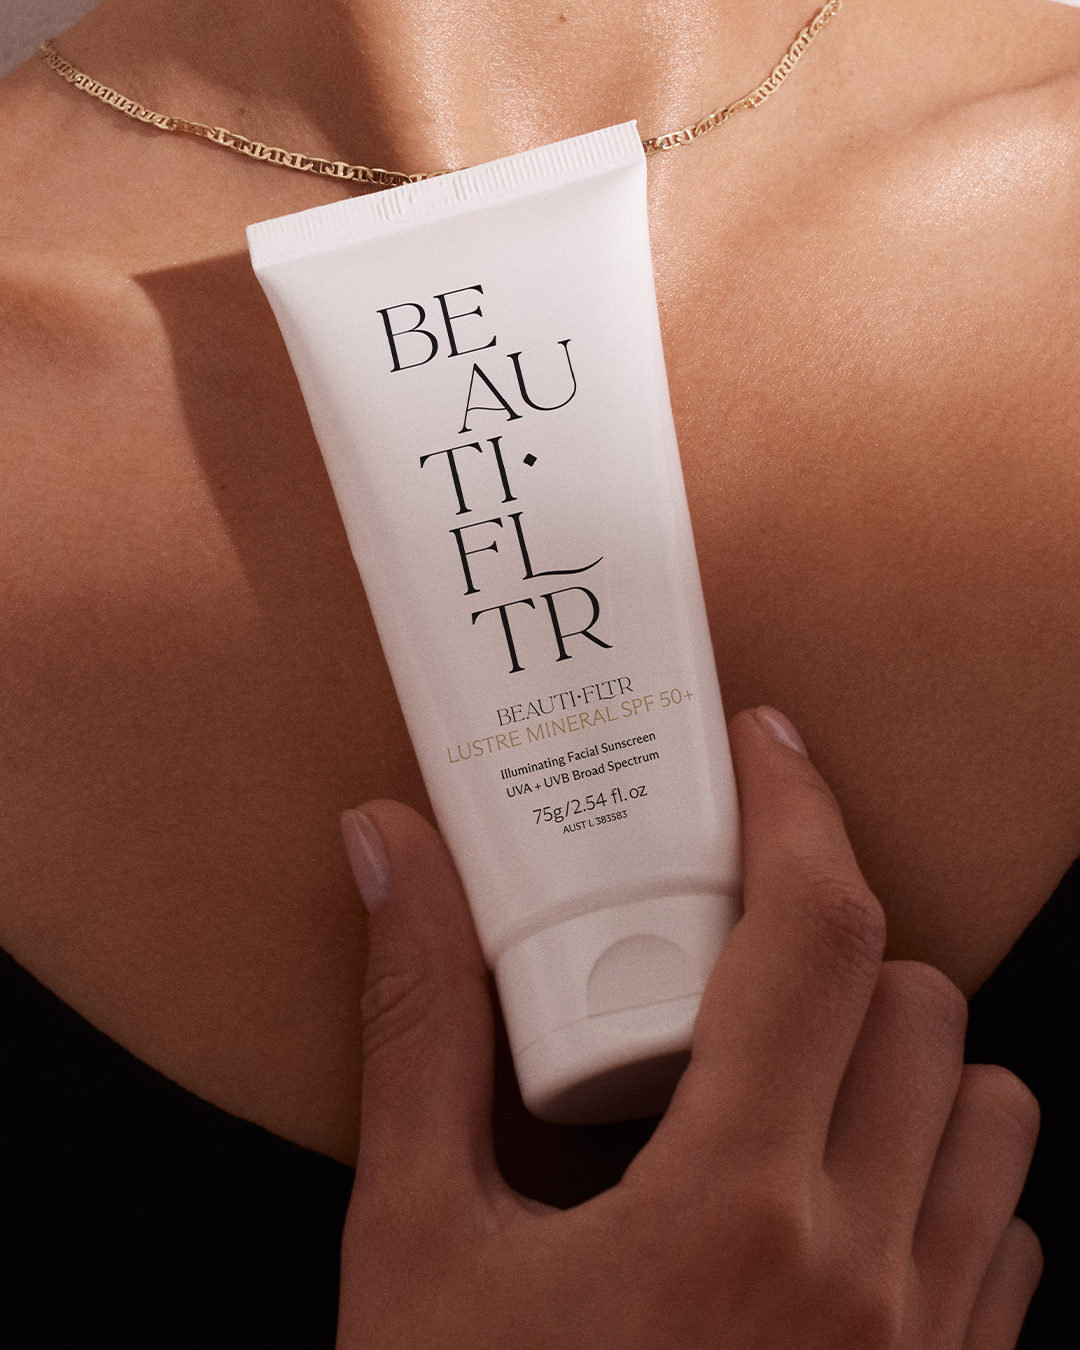 Close-up of hands holding a tube of BEAUTIFLTR sunscreen against bare skin